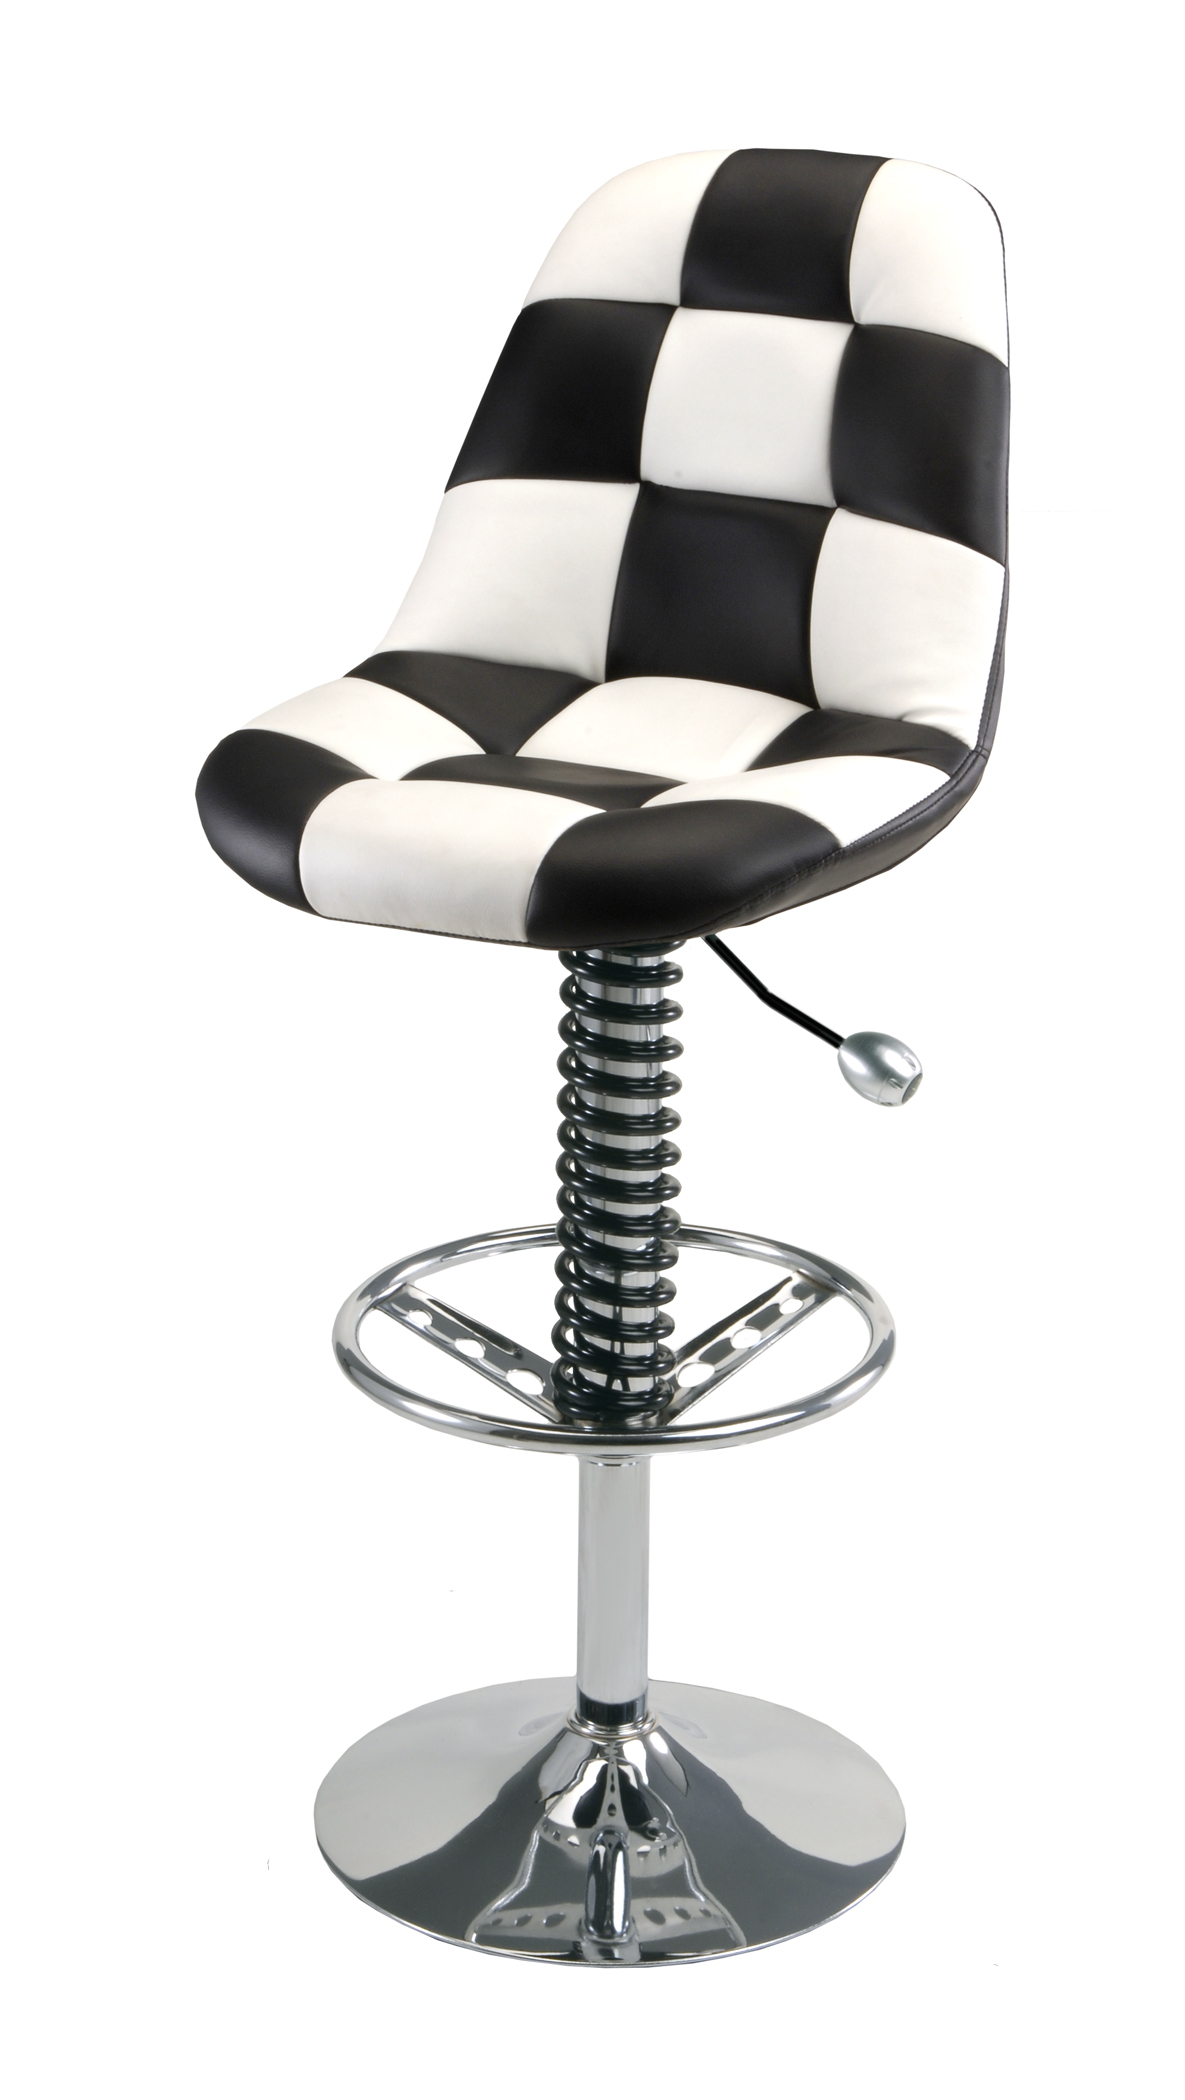 Intro-Tech Automotive, Pitstop Furniture, HR1300W Crew Chair White, Bar Chair